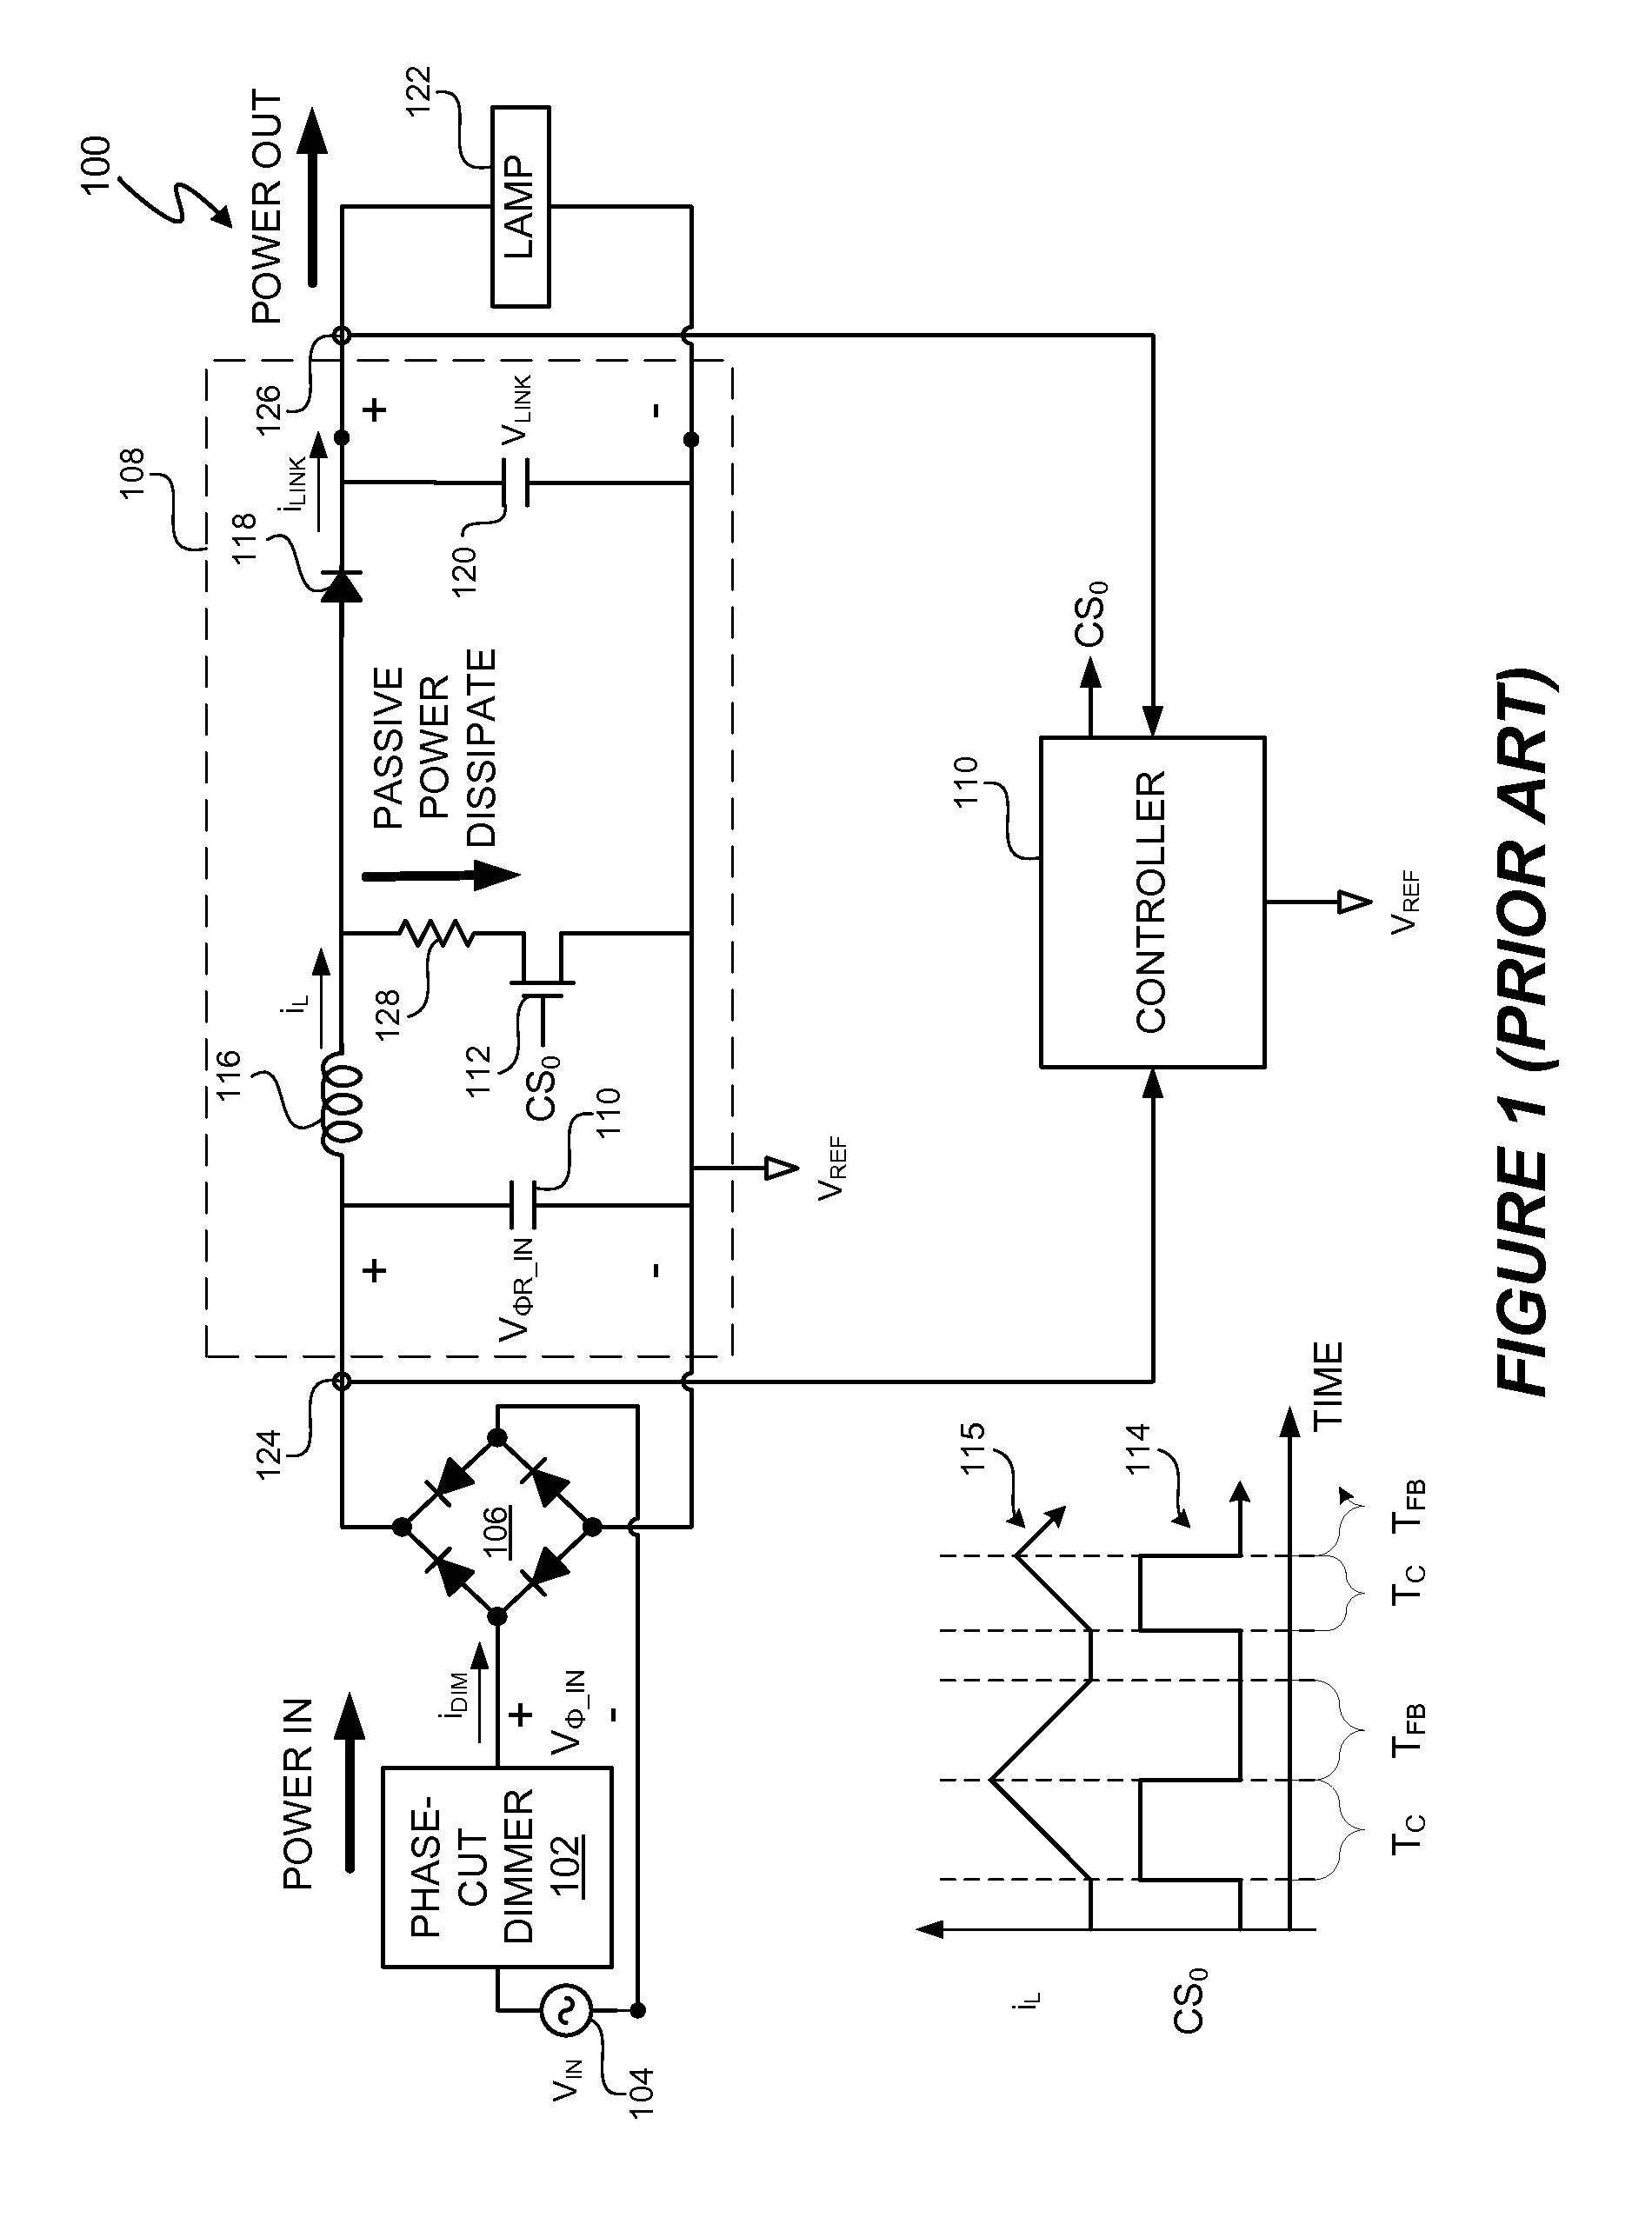 Controlled Power Dissipation In A Lighting System